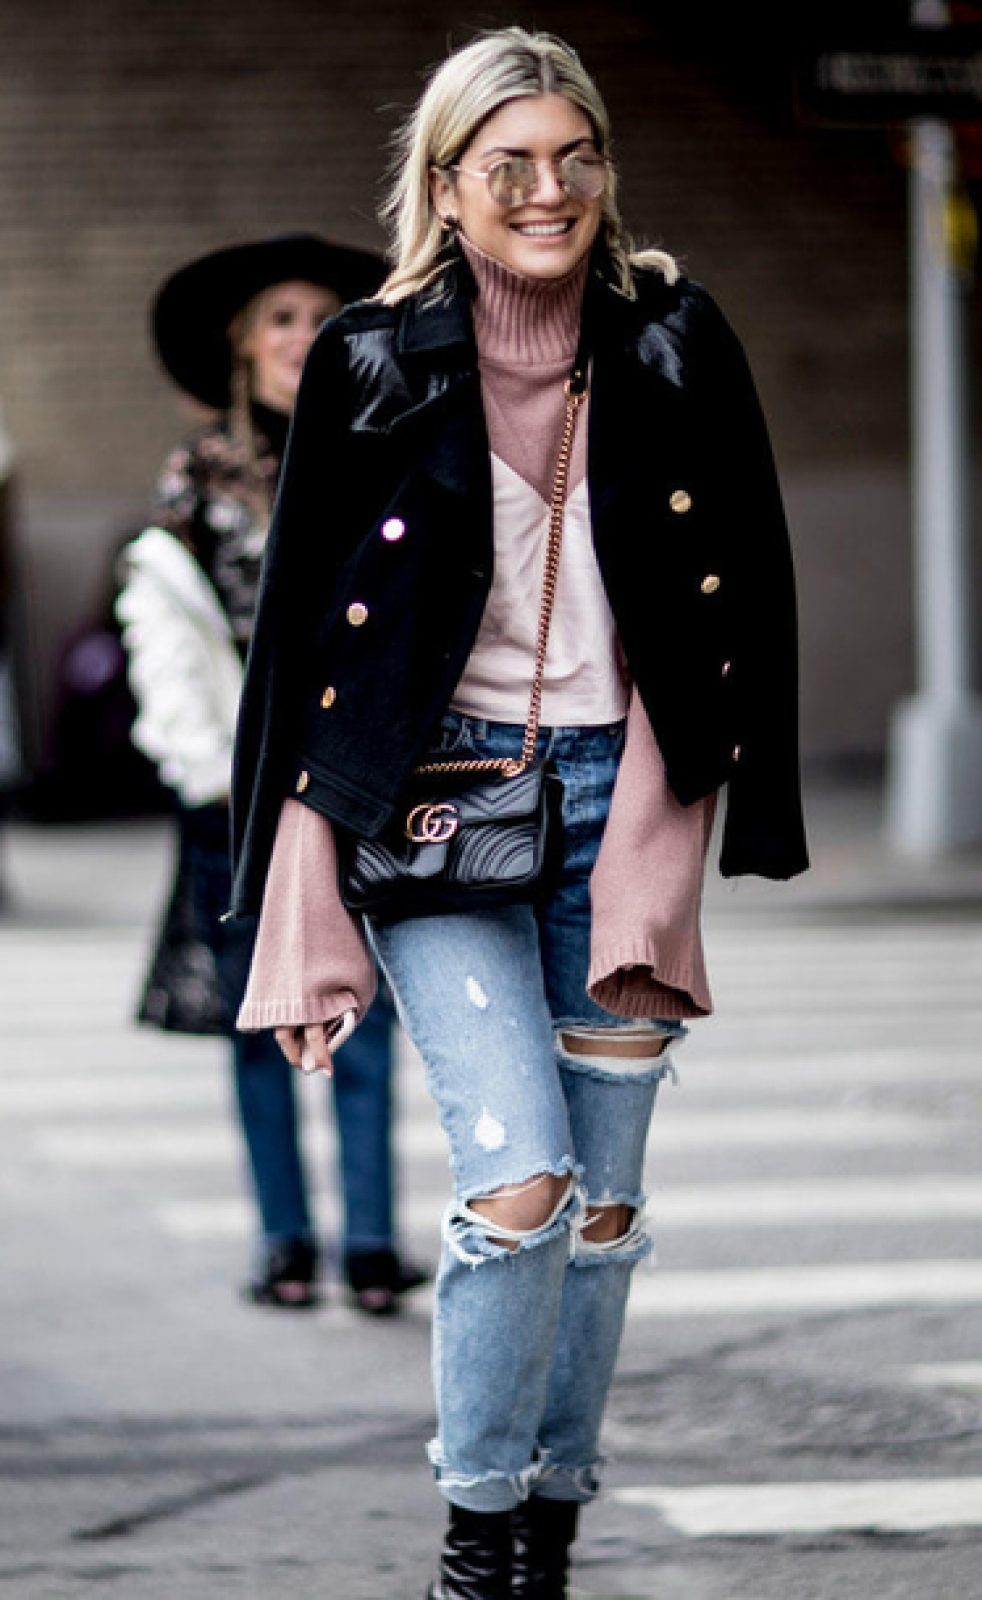 24sq8z-l-610×610-jacket-nyfw+2017-fashion+week+2017-fashion+week-streetstyle-black+jacket-sweater-pink+sweater-bell+sleeves-bell+sleeve+sweater-denim-jeans-blue+jeans-ripped+jeans–bag-gucci-gucci+